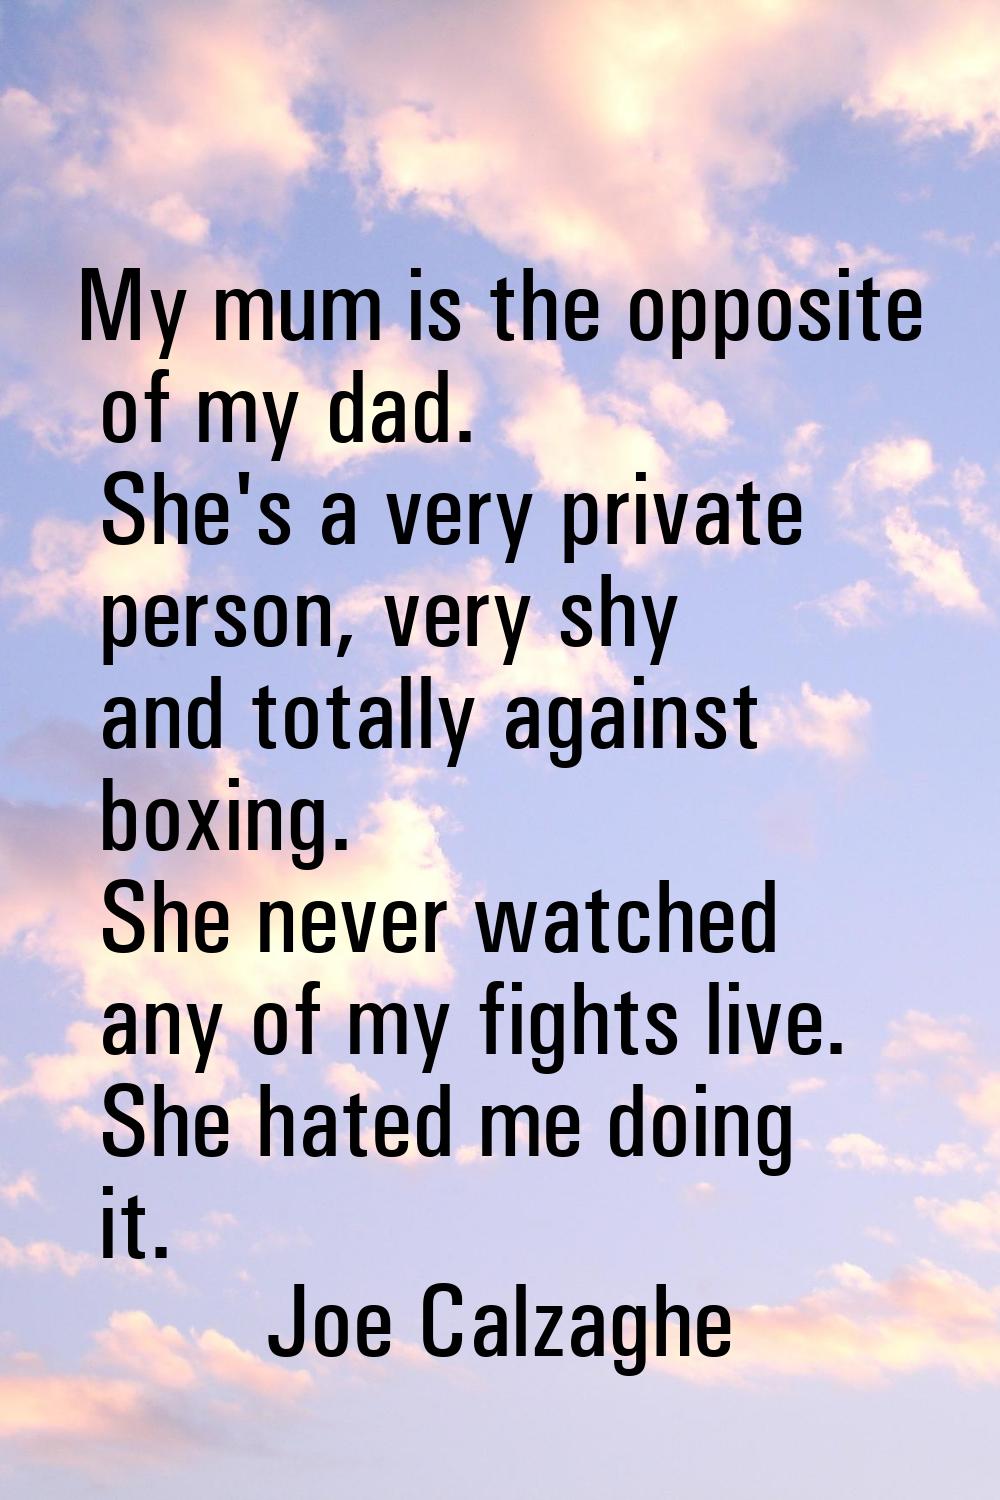 My mum is the opposite of my dad. She's a very private person, very shy and totally against boxing.